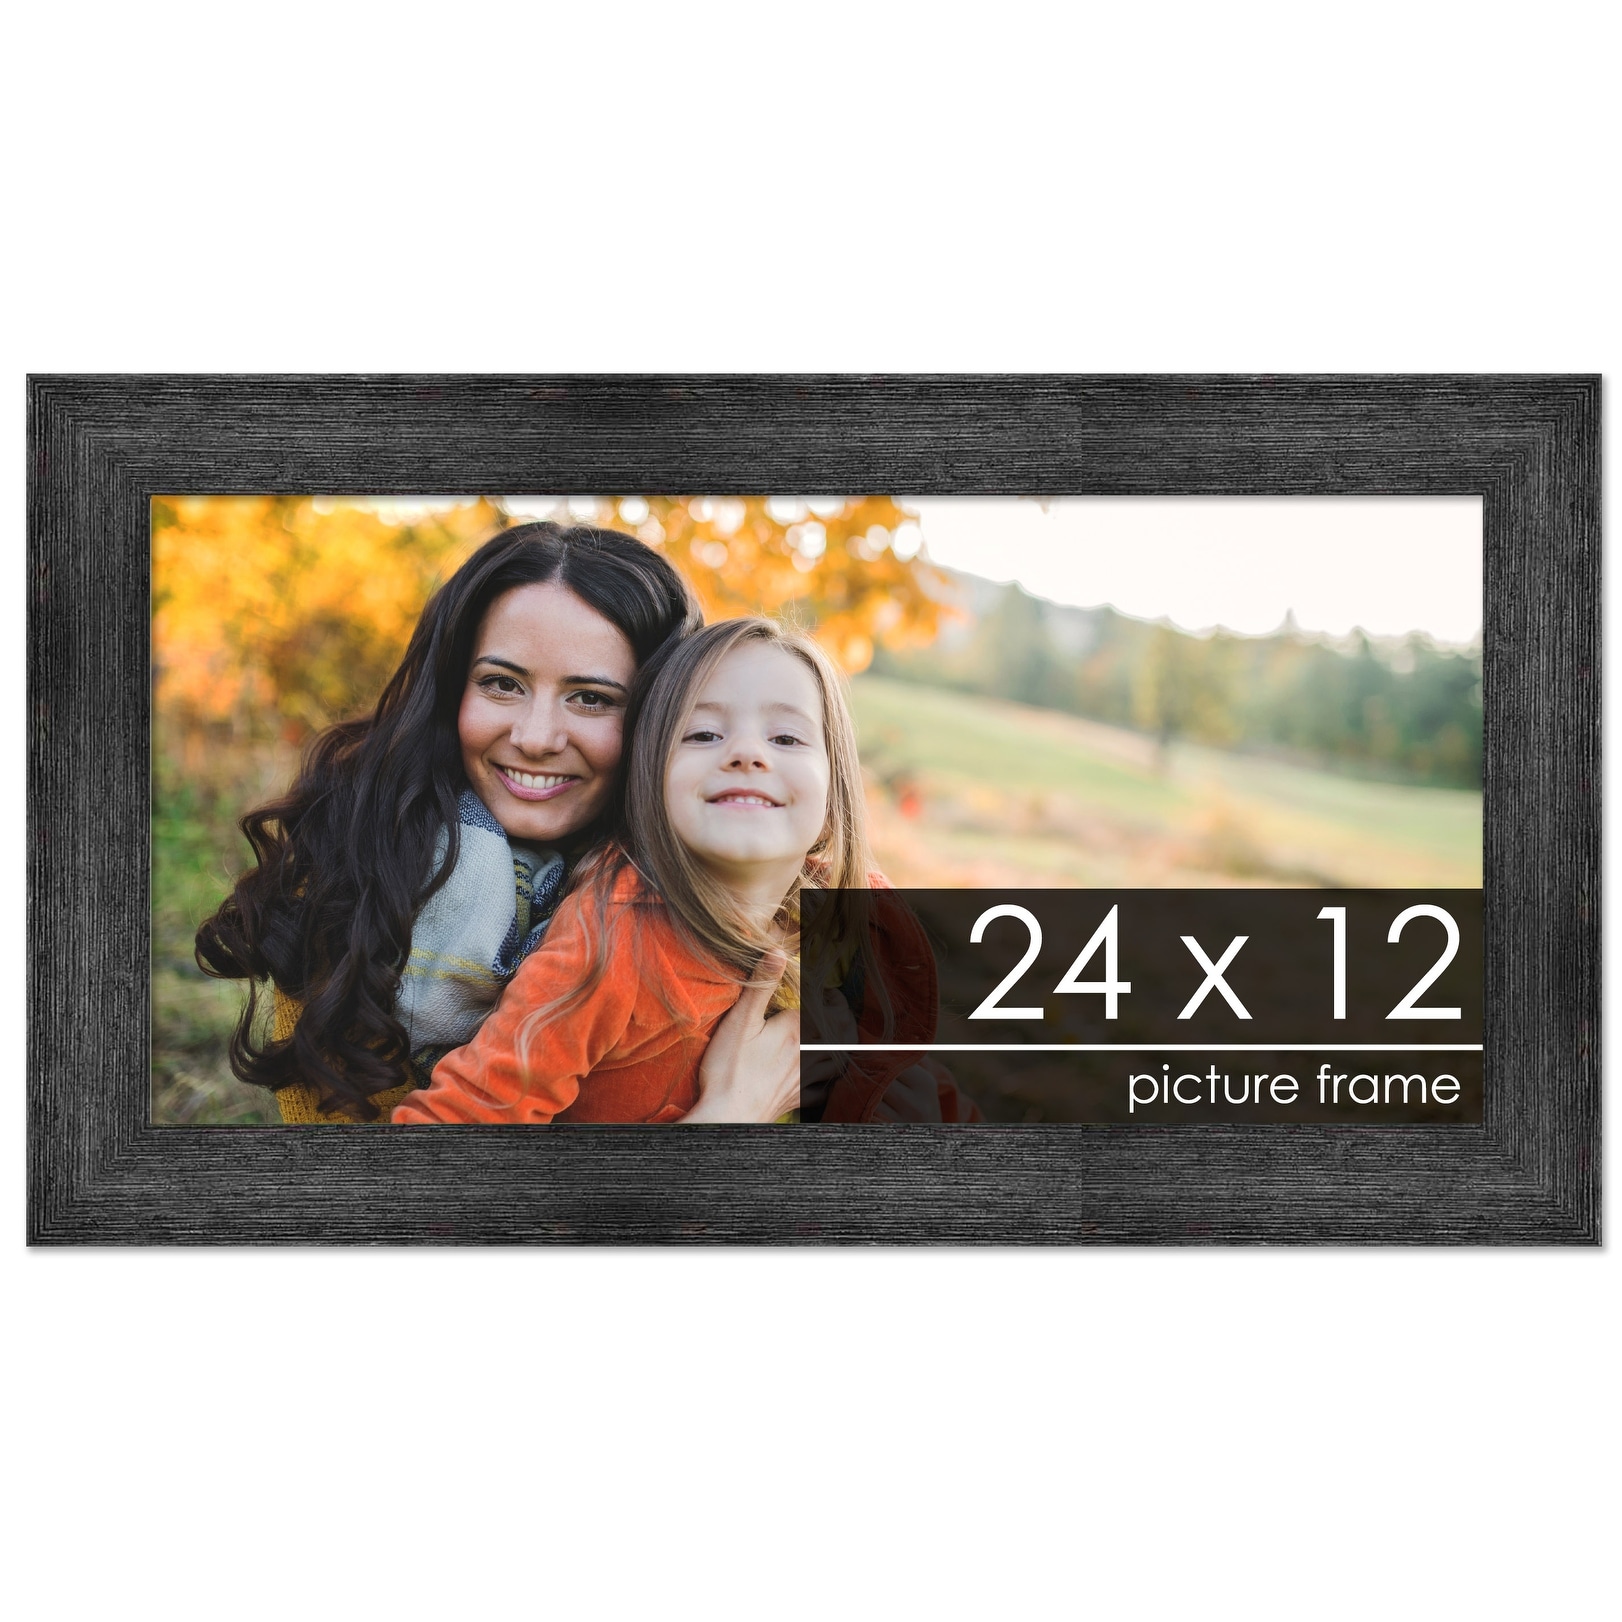 16x20 Distressed/Aged Black Wood Picture Frame - UV Acrylic, Foam Board Backing, & Hanging Hardware Included!